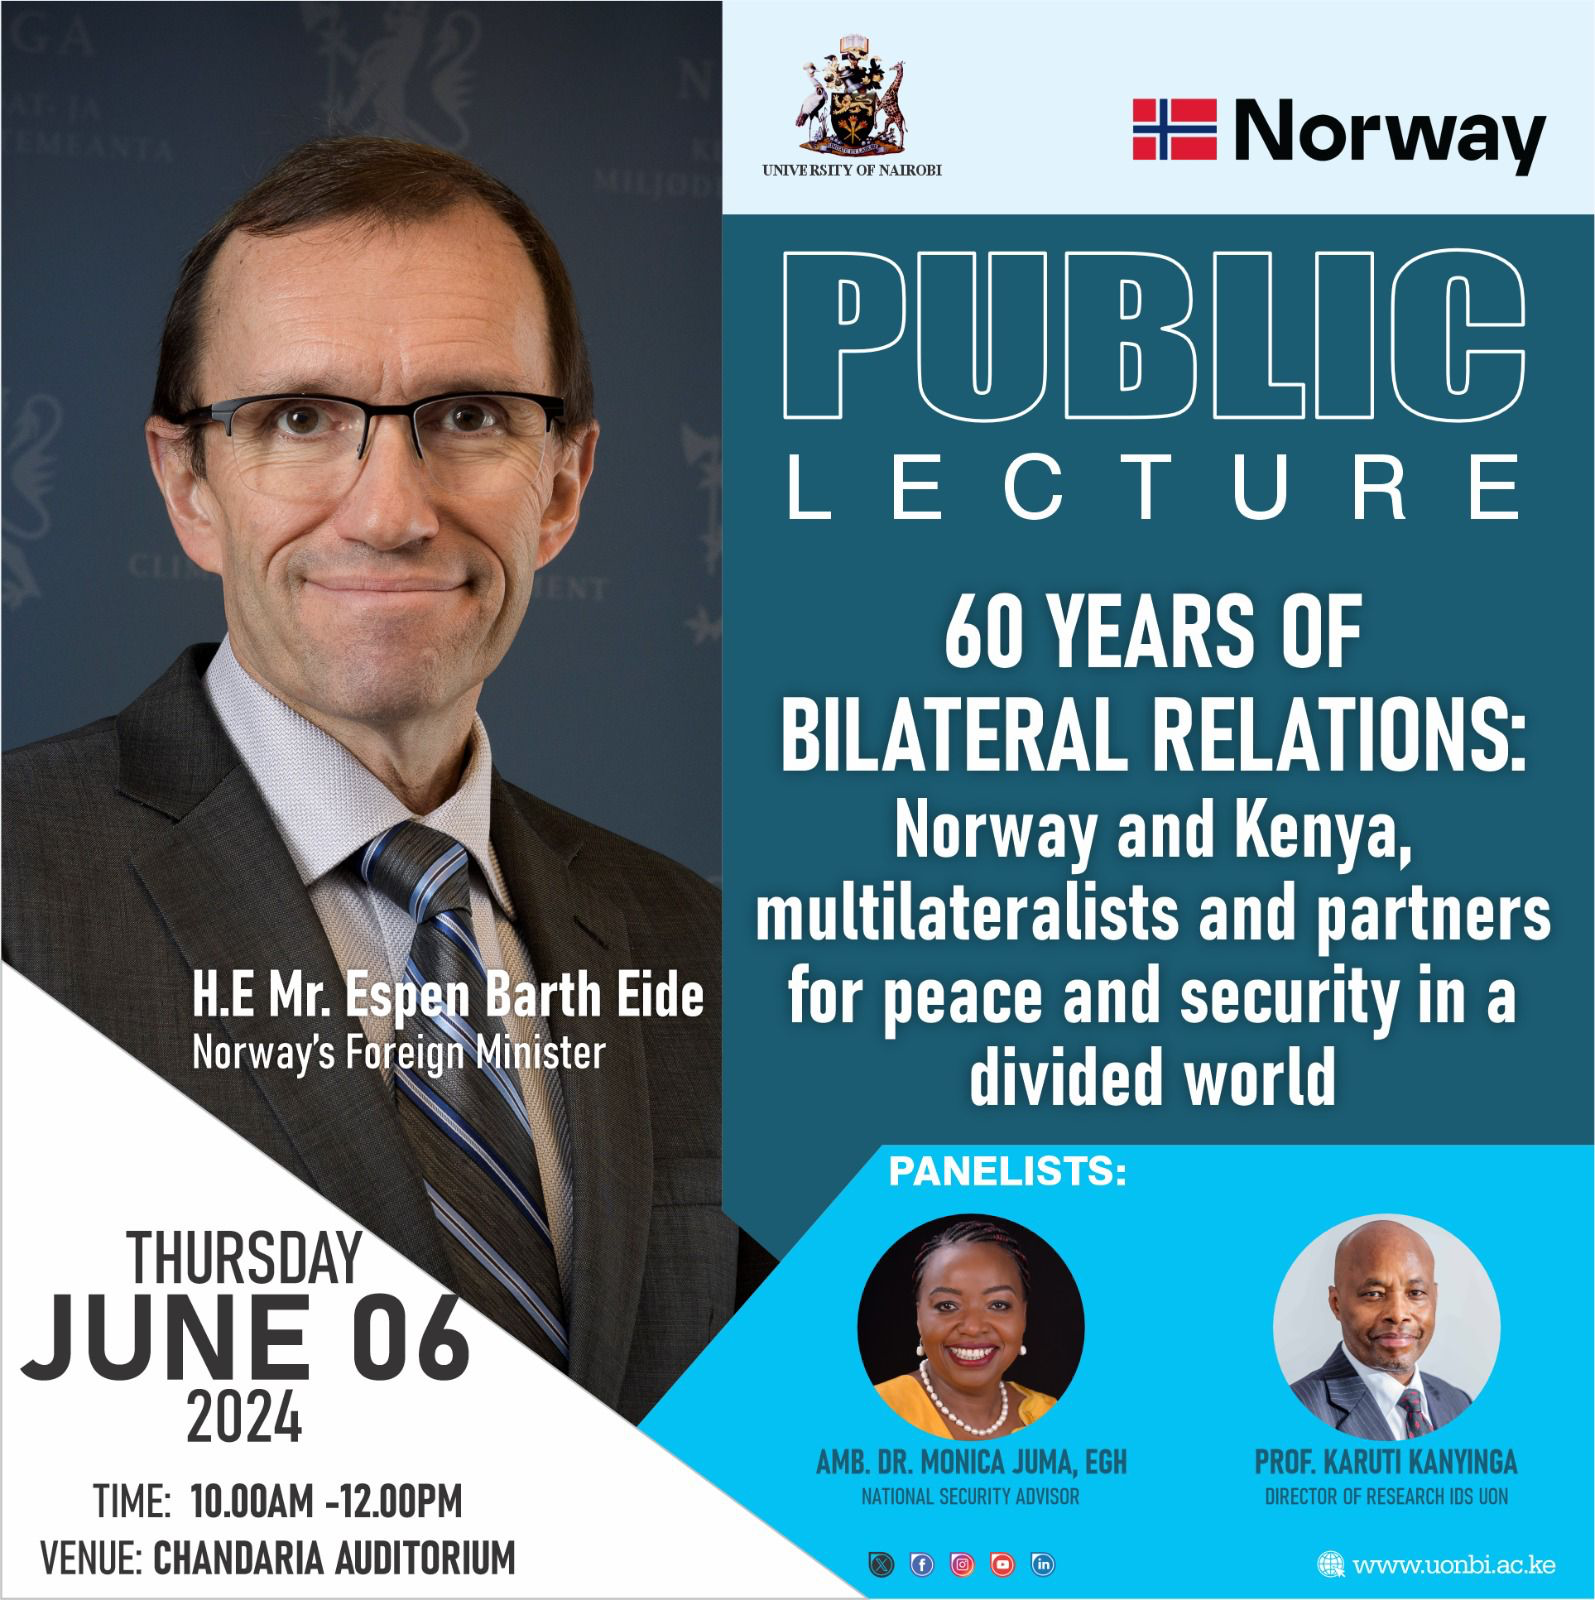  PUBLIC LECTURE ON 60 YEARS OF BILATERAL RELATIONS